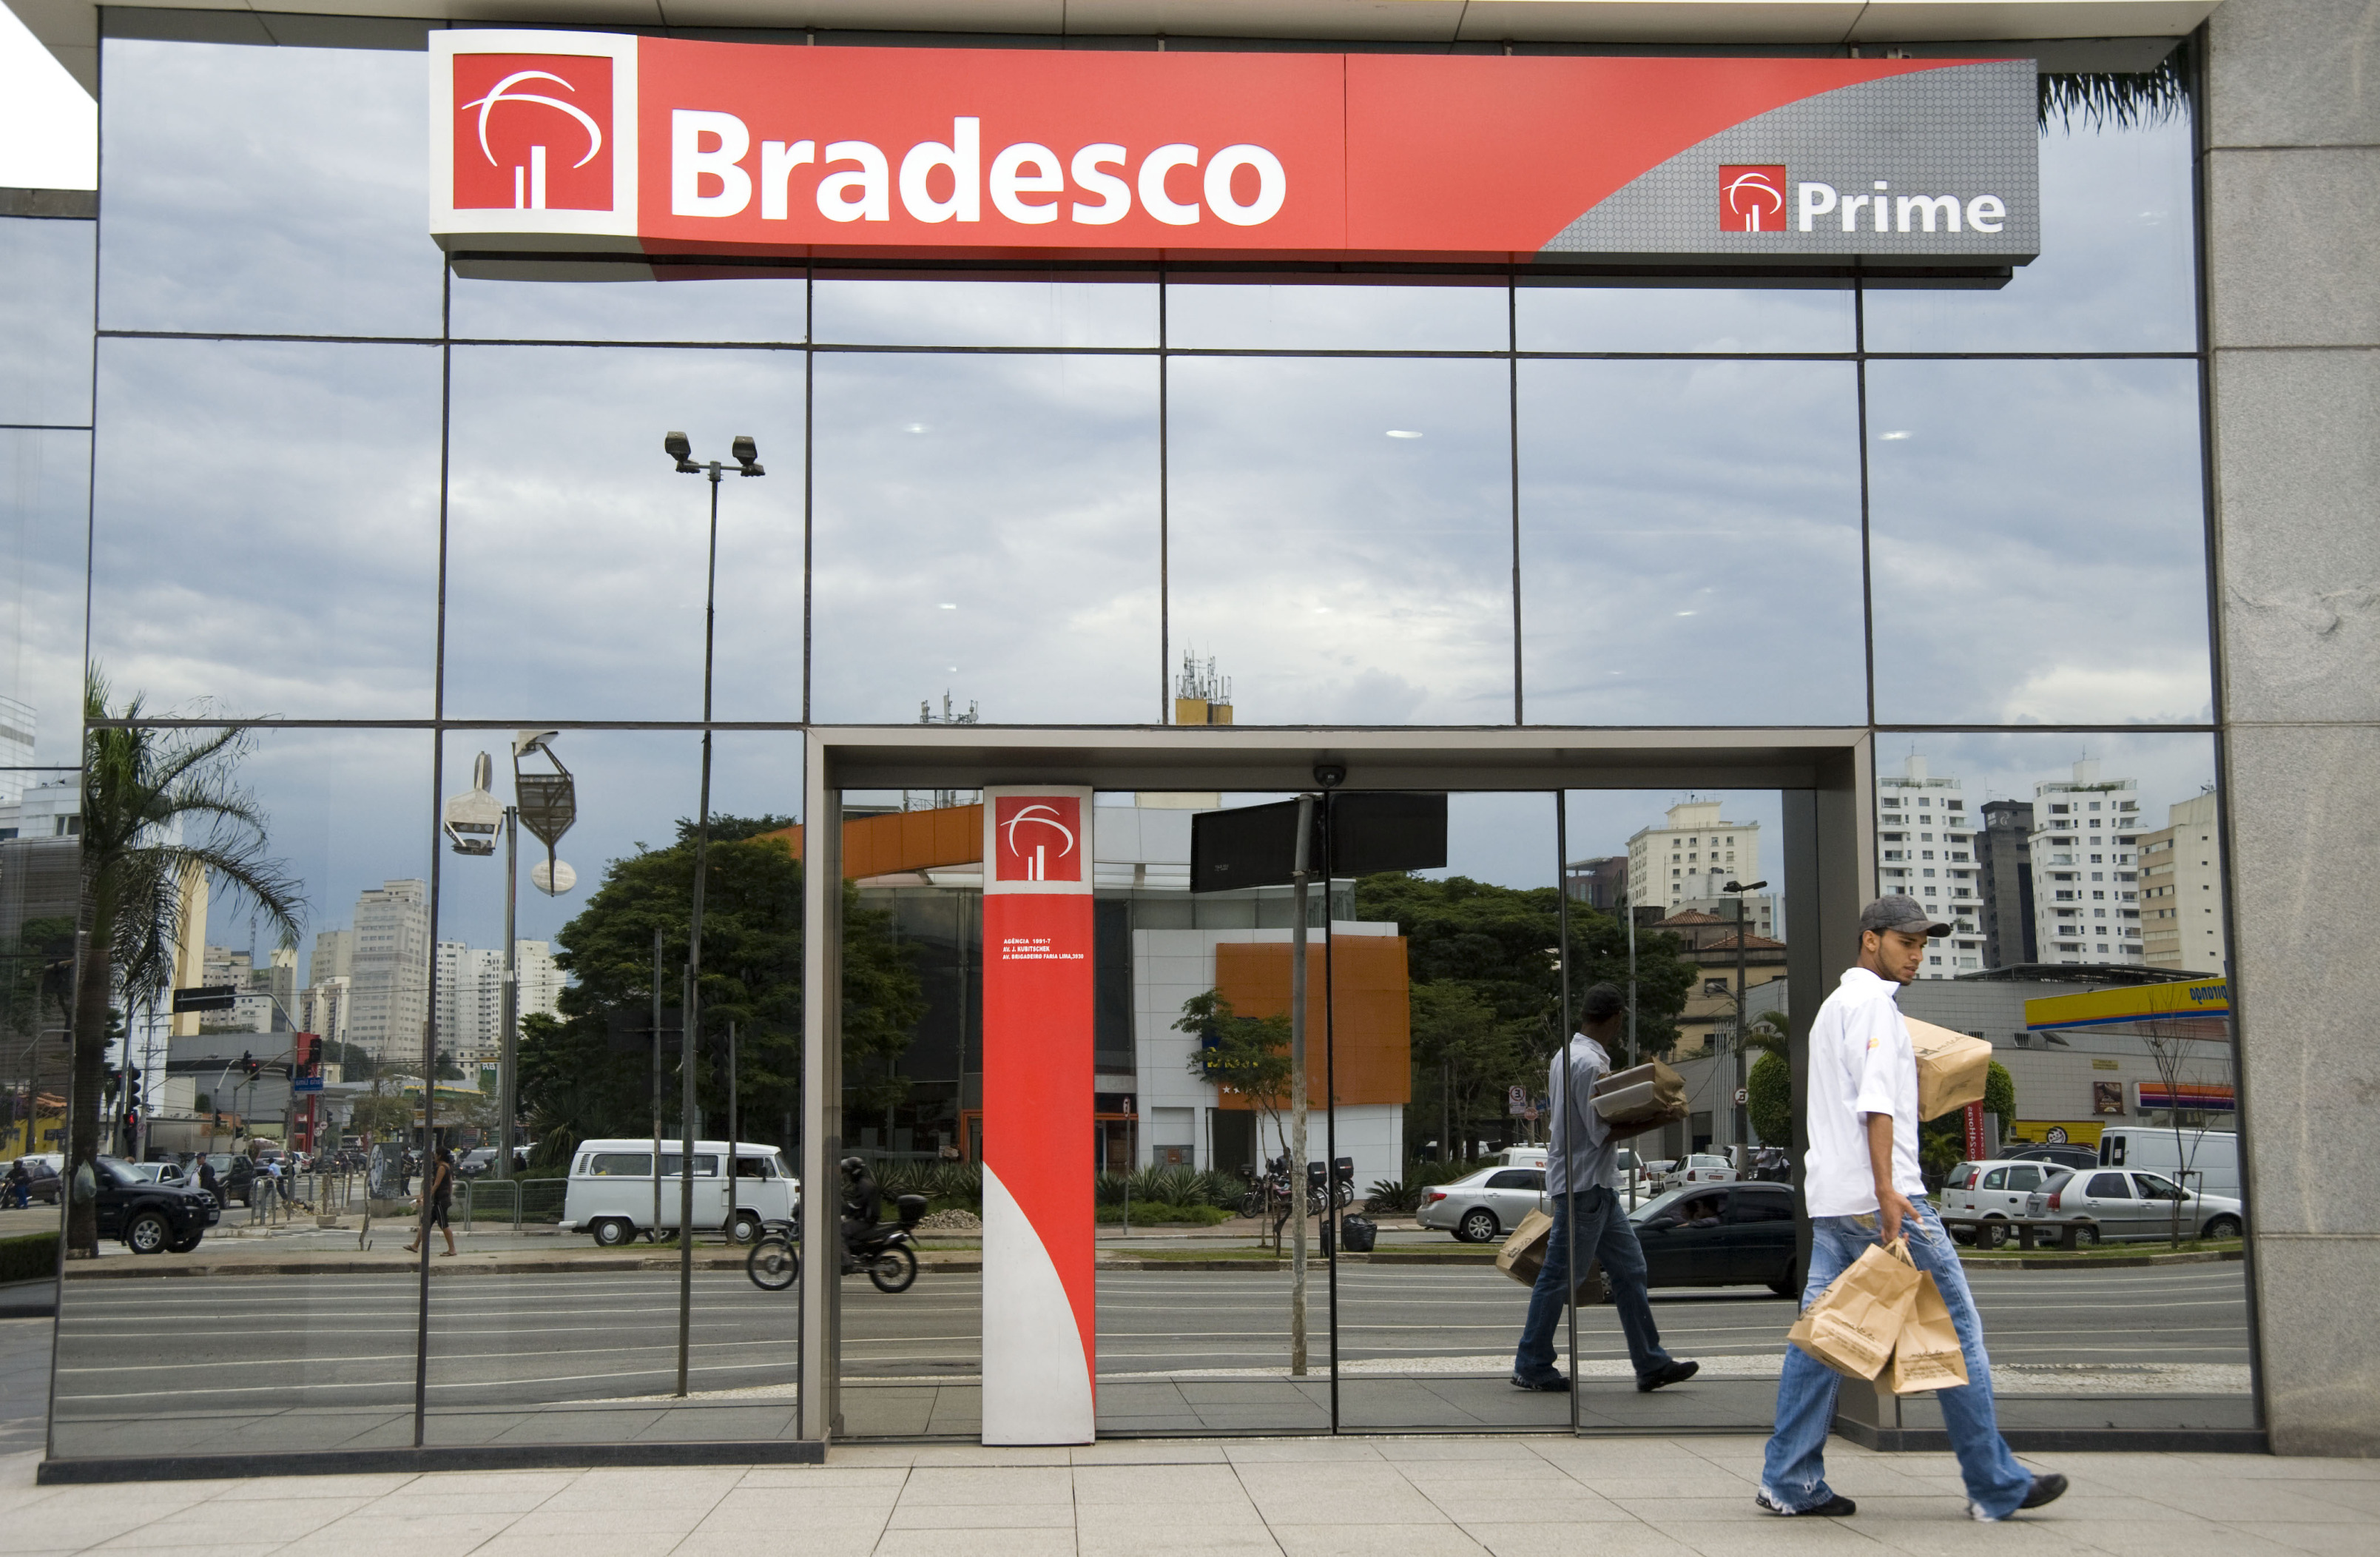 Bradesco Hunts for More US Fintech Partners to Speed Expansion